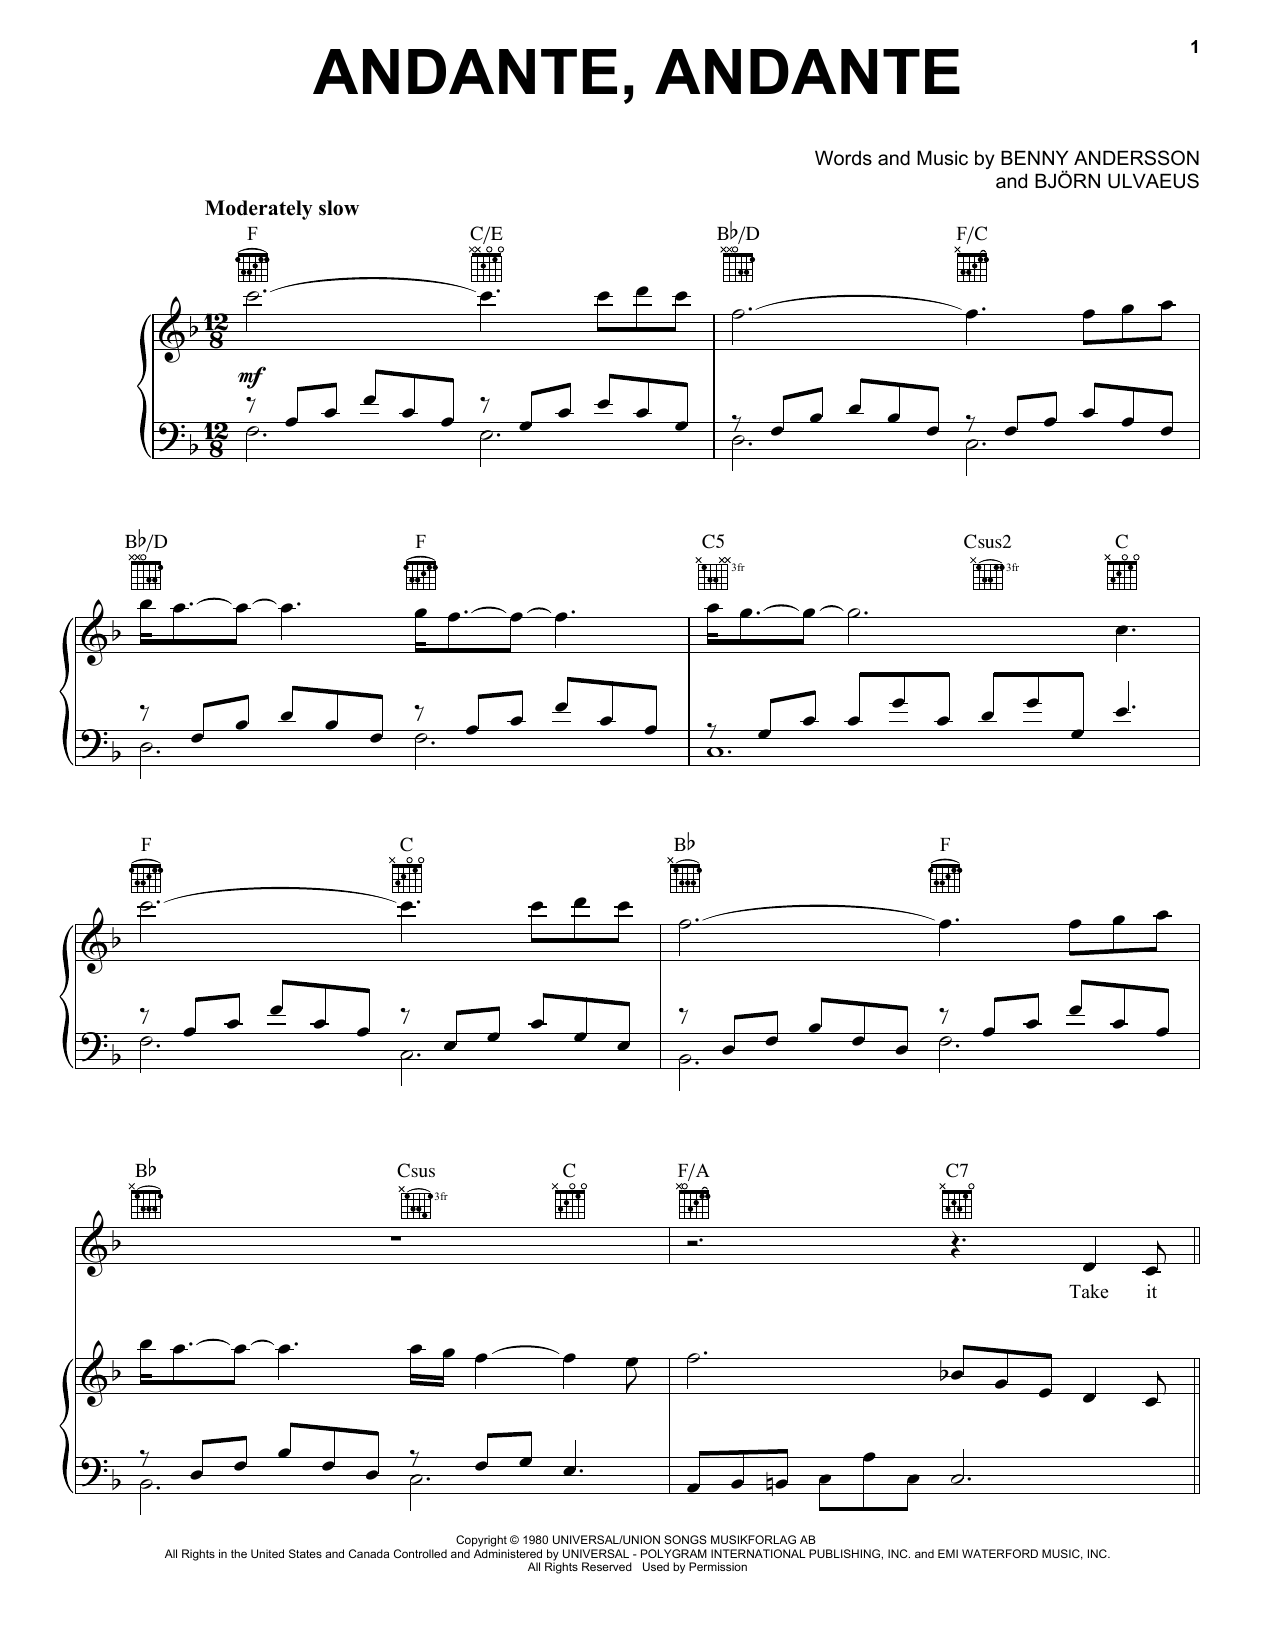 ABBA Andante, Andante (from Mamma Mia! Here We Go Again) sheet music notes printable PDF score